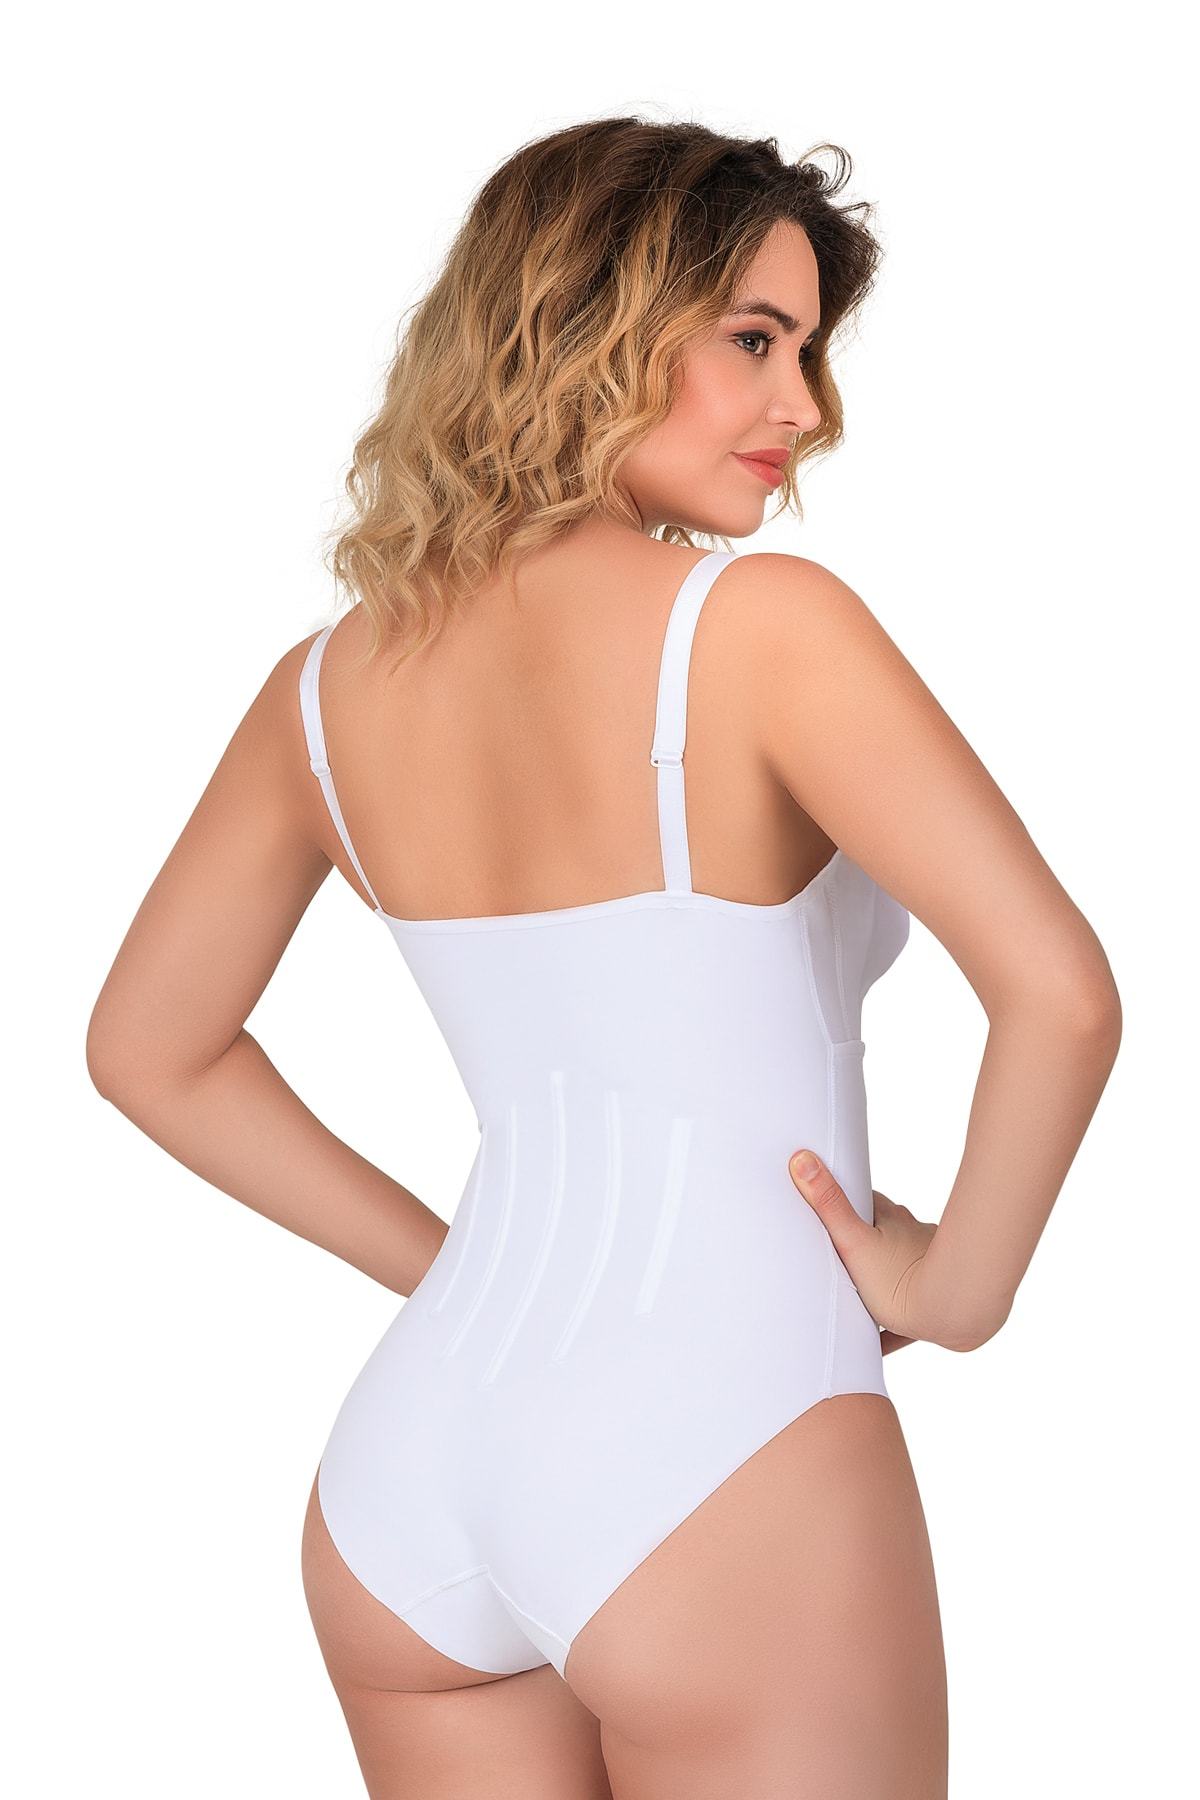 Shopymommy 2944 Back-Supported Body Corset Nursing Tank Top